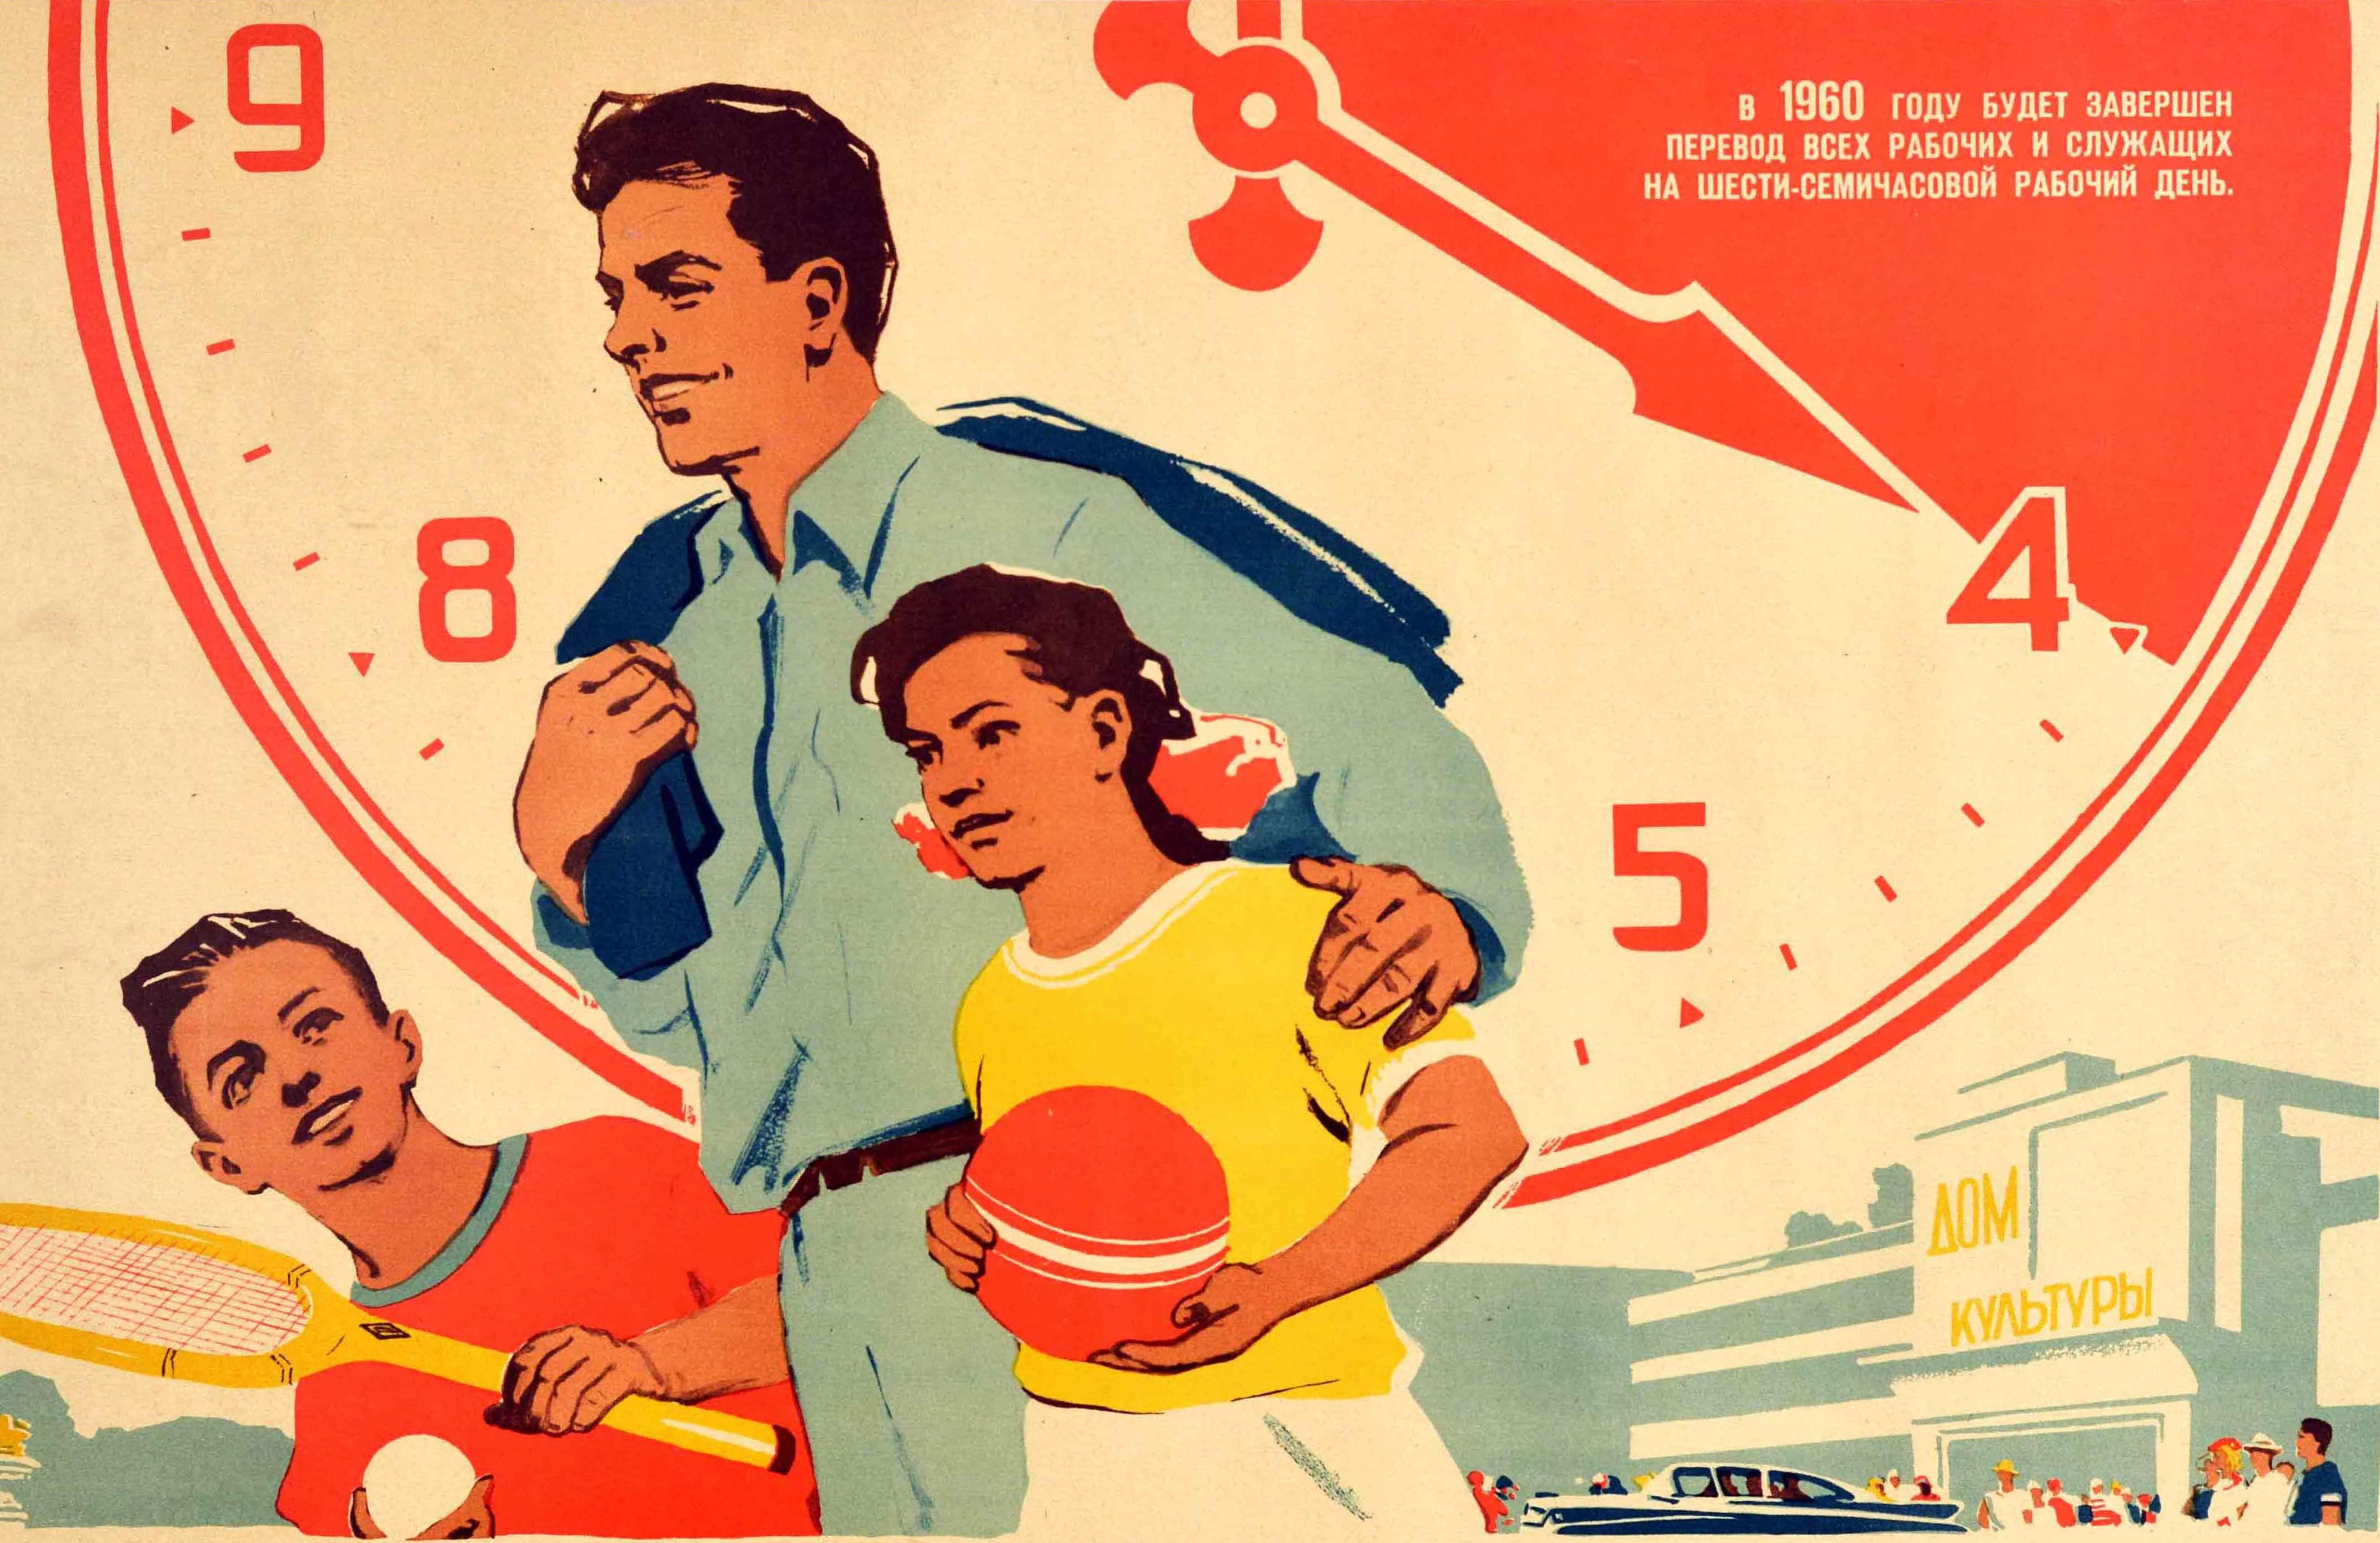 Original vintage Soviet propaganda poster featuring an illustration of a smiling man with a jacket over his shoulder and two children walking with him, a boy with a tennis racket and a girl with a ball ready for sport activities, in front of a large